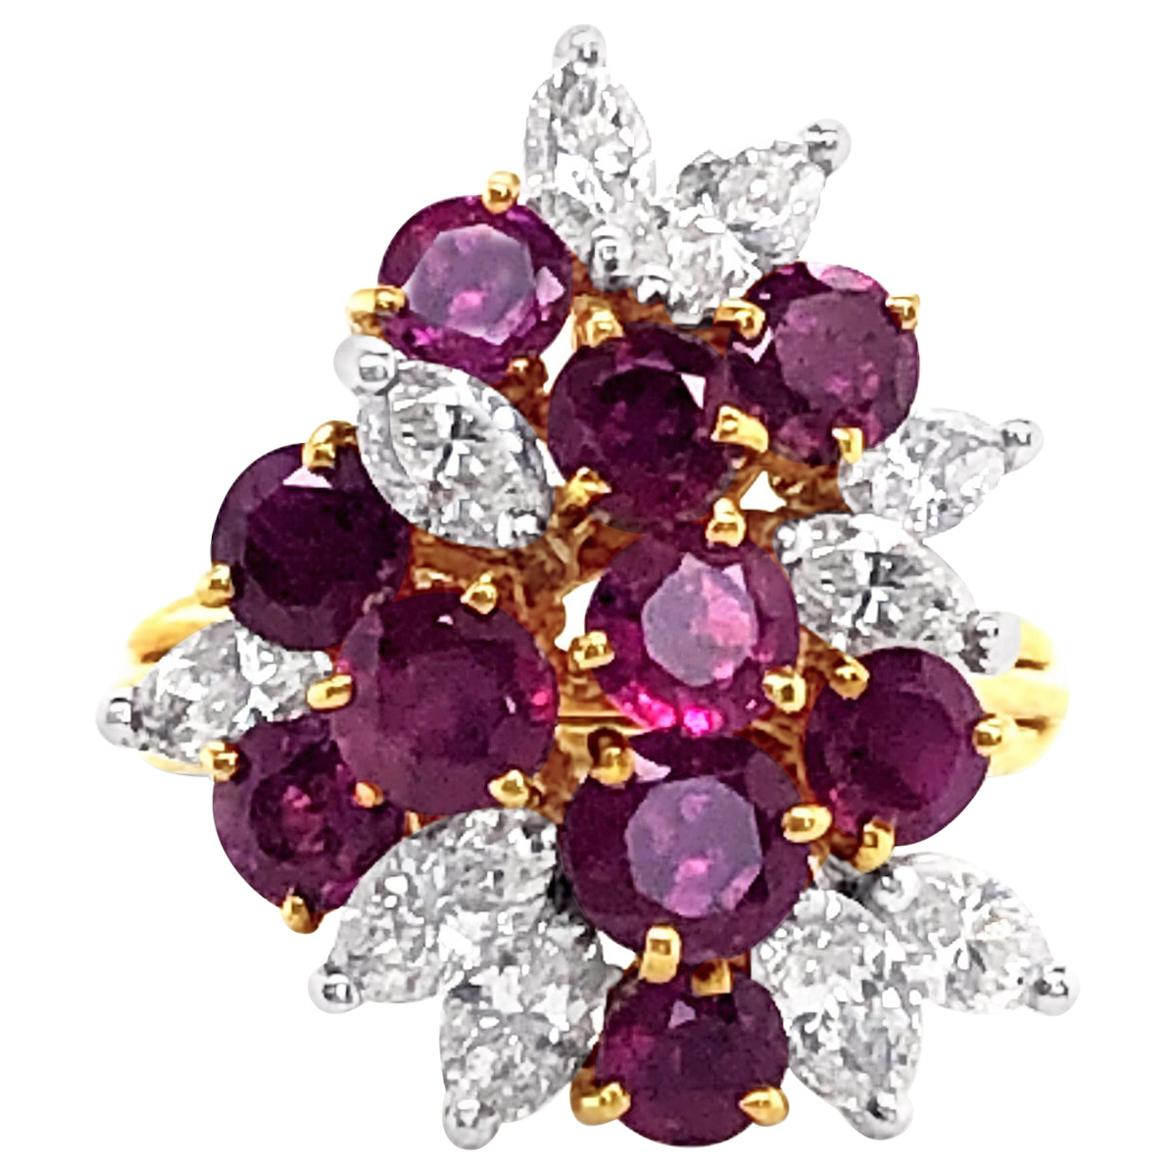 2.88 Carat 'total weight' Ruby and Diamond Cluster Ring in 18 Karat Yellow Gold